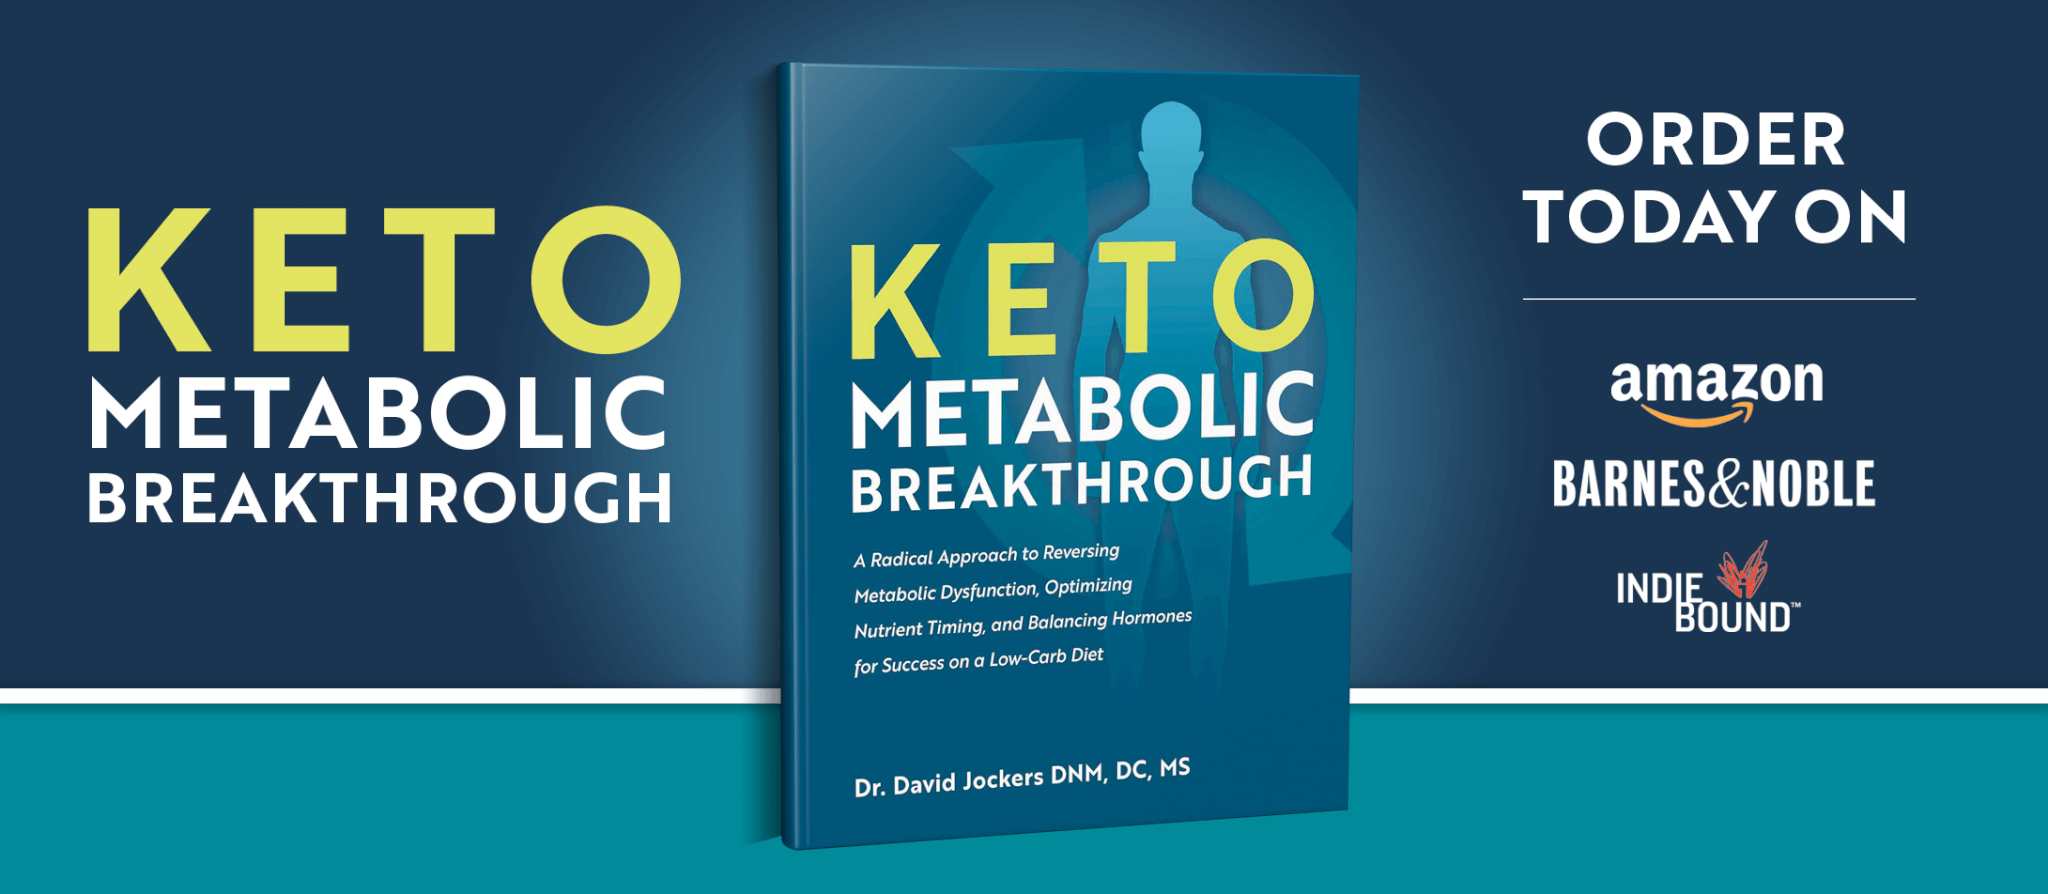 Keto Diet, Is the Keto Diet Bad for the Microbiome?